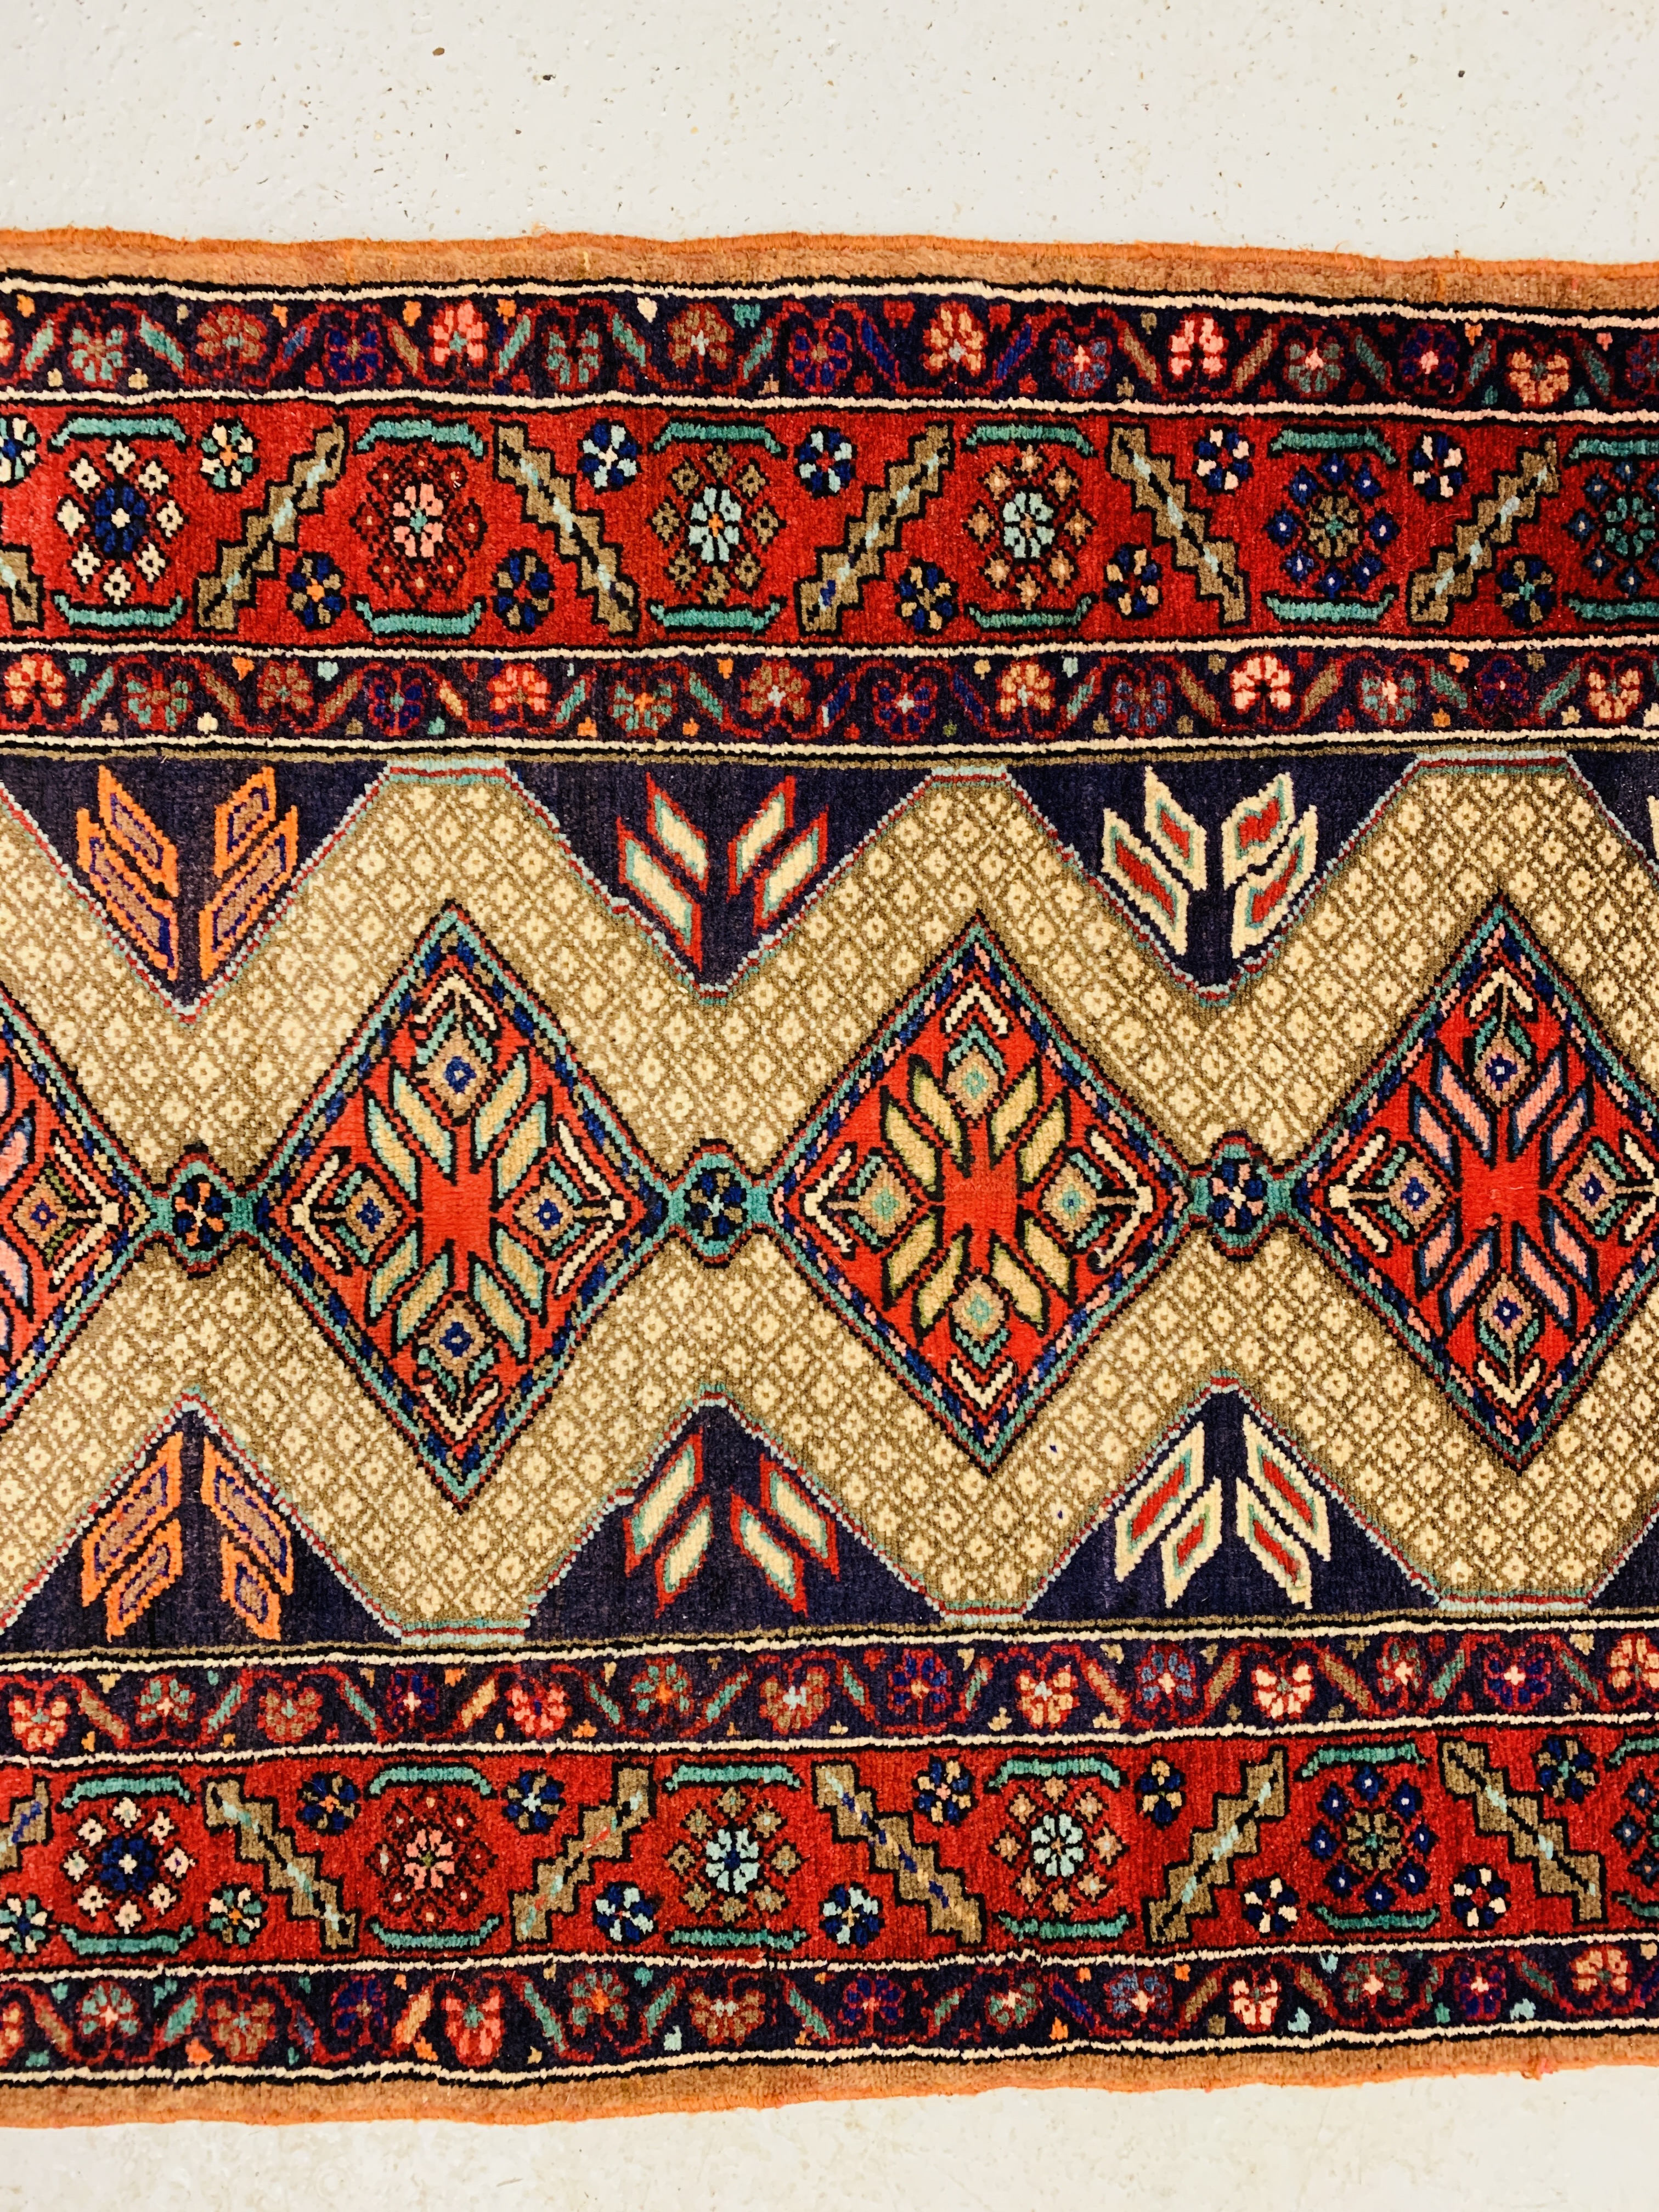 A HAMADAN RED/BLUE PATTERNED CARPET RUNNER 2.9 x 1.05. 1. - Image 3 of 4